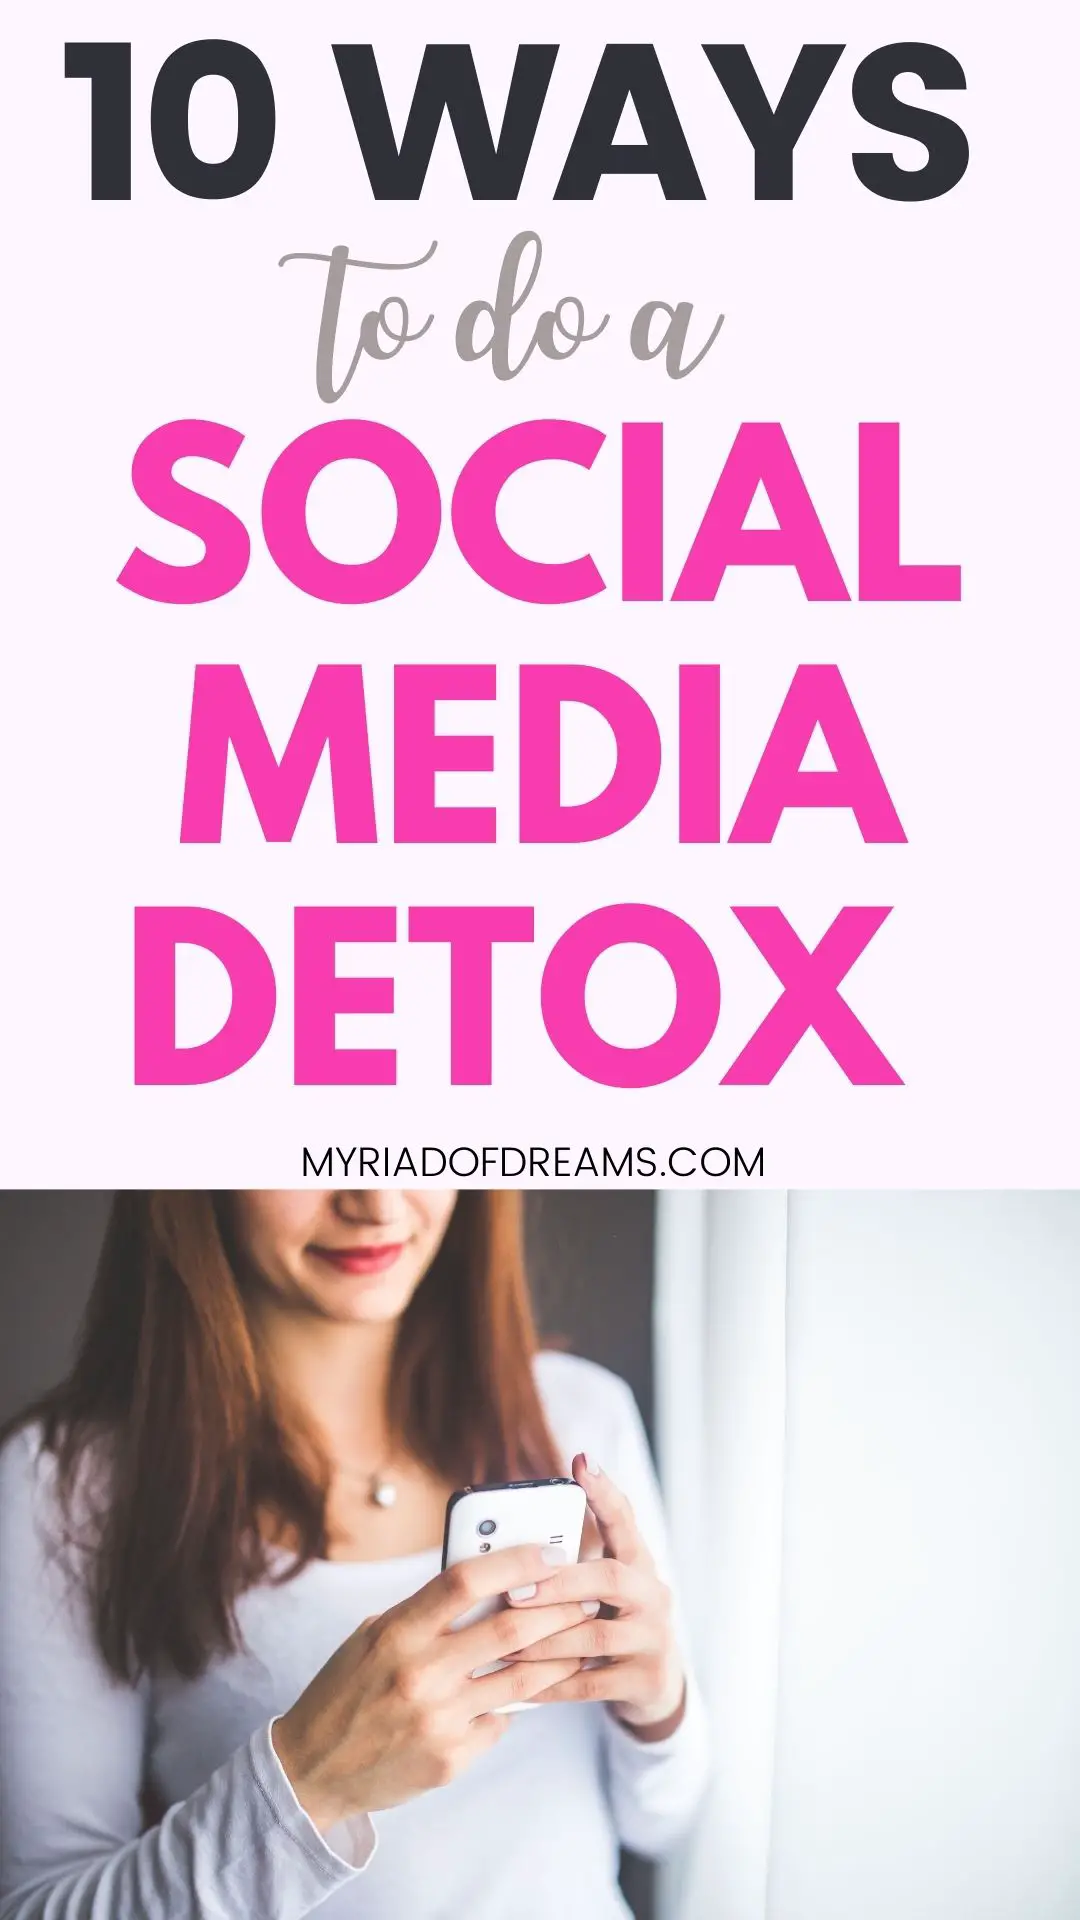 Social media detox tips that will help you reduce your screen time.  A digital detox doesn’t necessarily means quitting social media. Learn to take a break from social media and take care of your mental health, digital detox ideas, how to unplug and do a social media cleanse. Live a healthy lifestyle, social media break, personal development, self improvement, personal growth, self care #digitaldetox #socialmedia #detox #personalgrowth #selfimprovement #wellness 